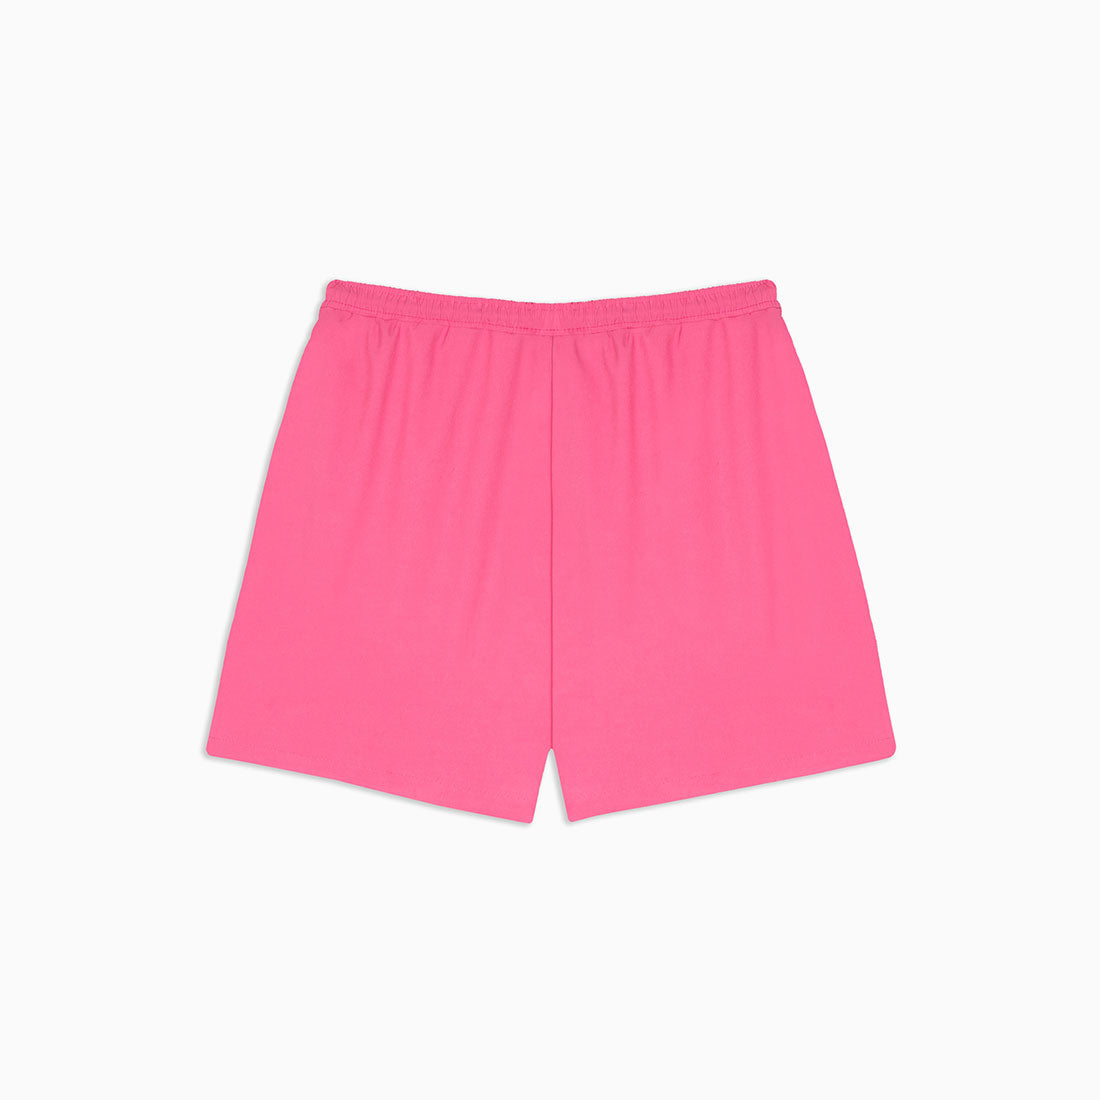 Dolly Noire Swimsuit - Mambo Strawberry Swimshort-Pink